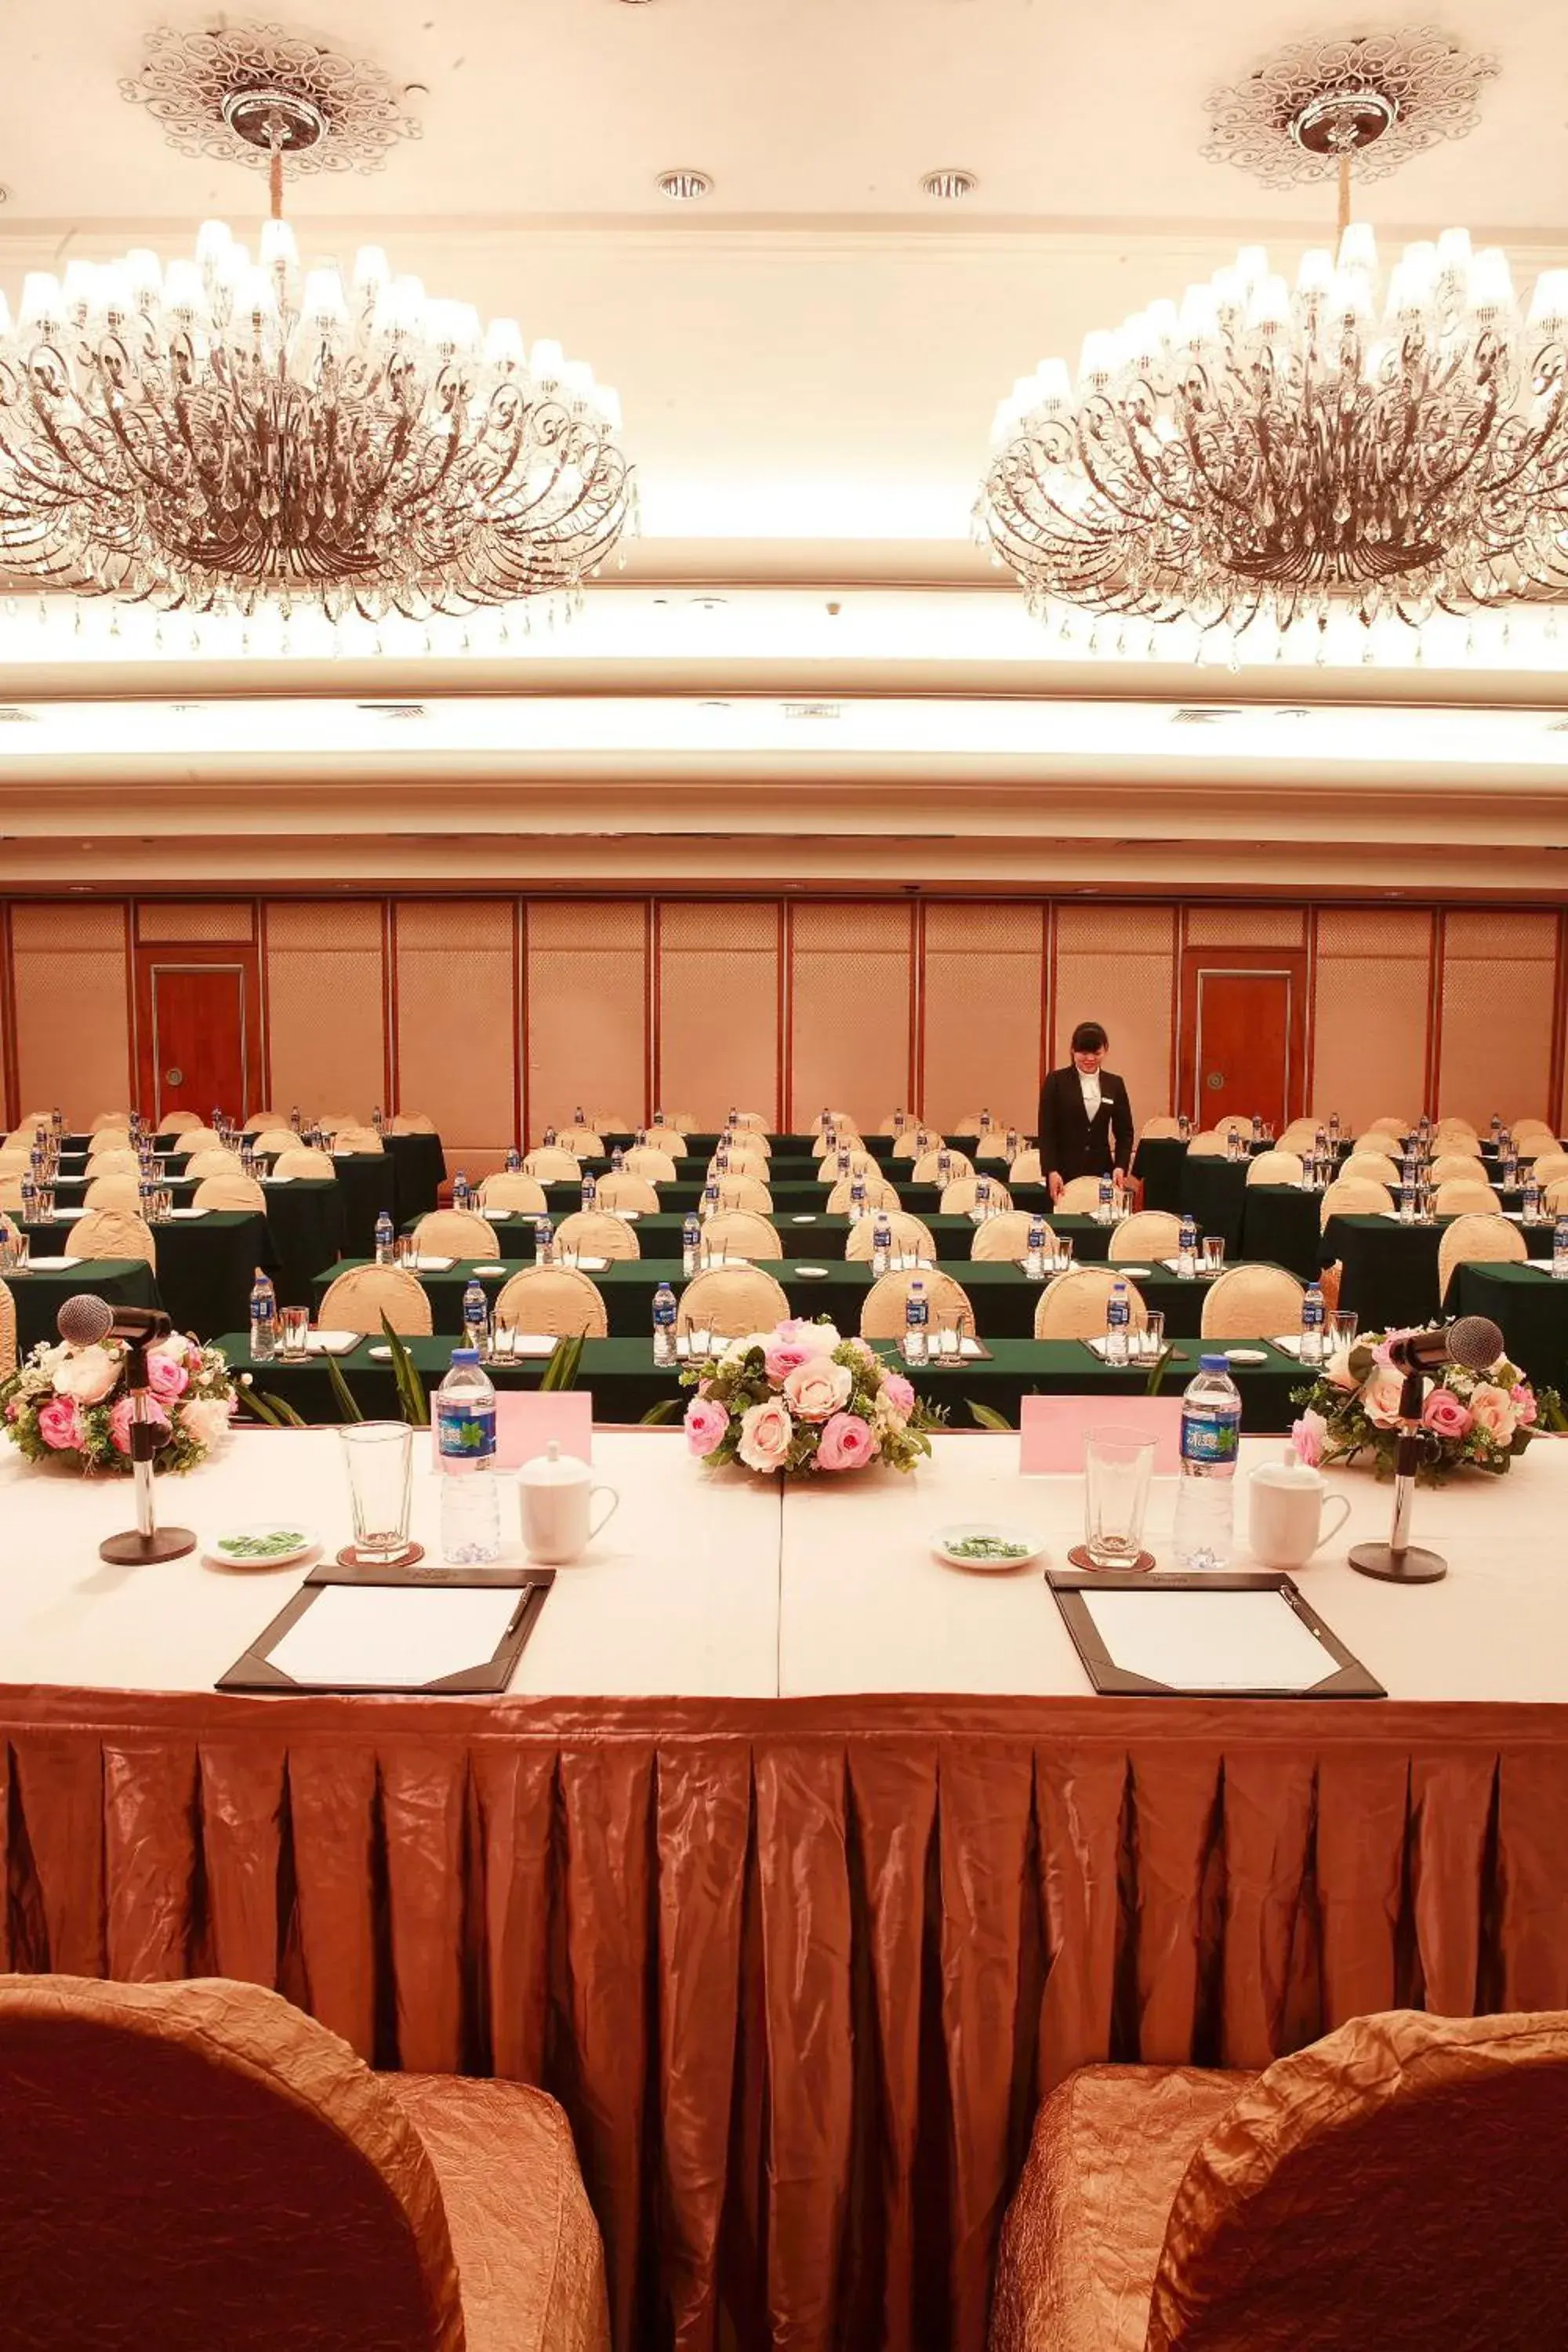 Meeting/conference room, Banquet Facilities in Grand Noble Hotel Dongguan